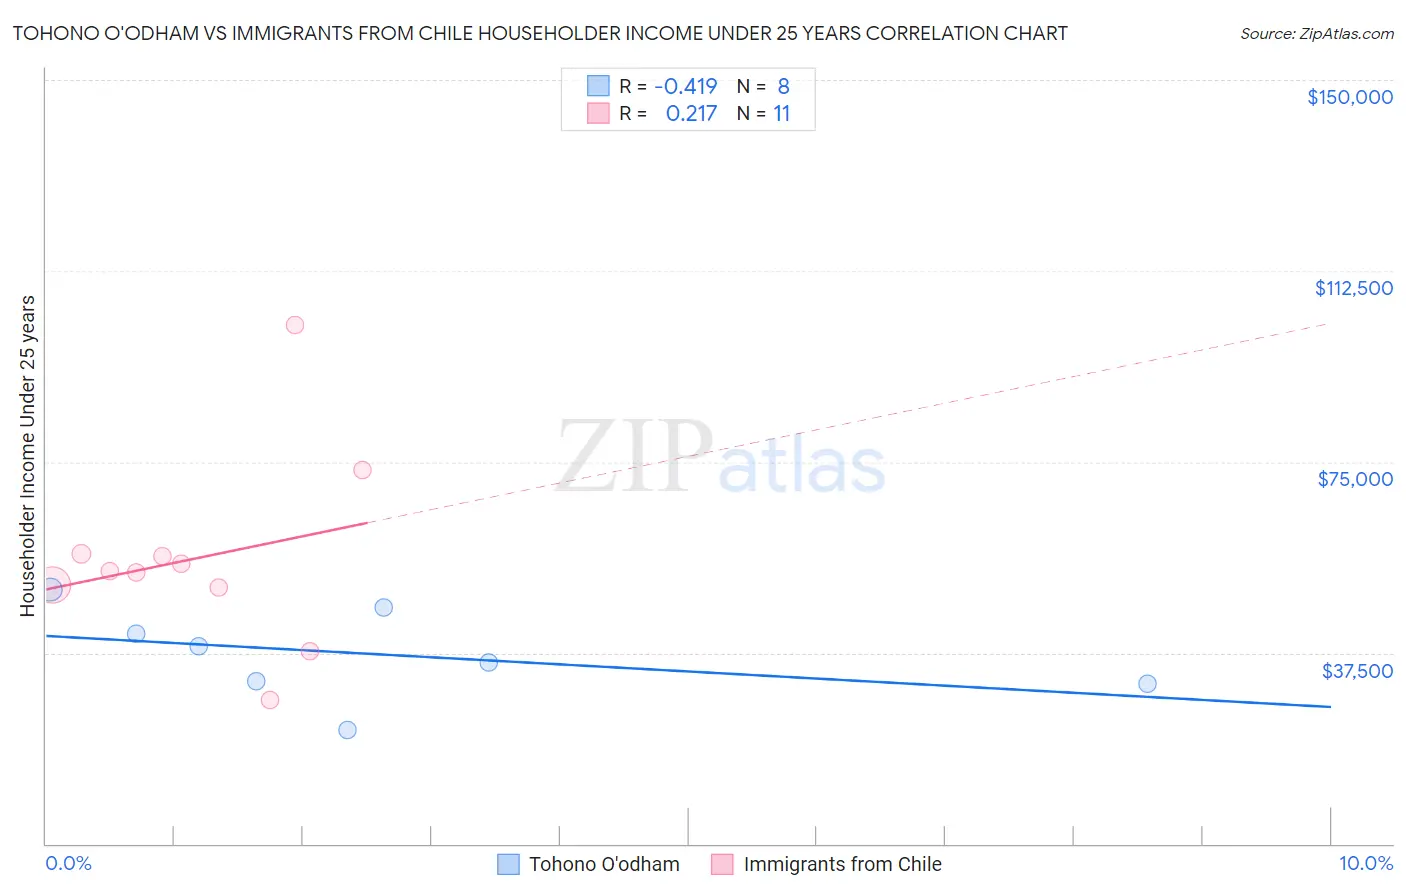 Tohono O'odham vs Immigrants from Chile Householder Income Under 25 years